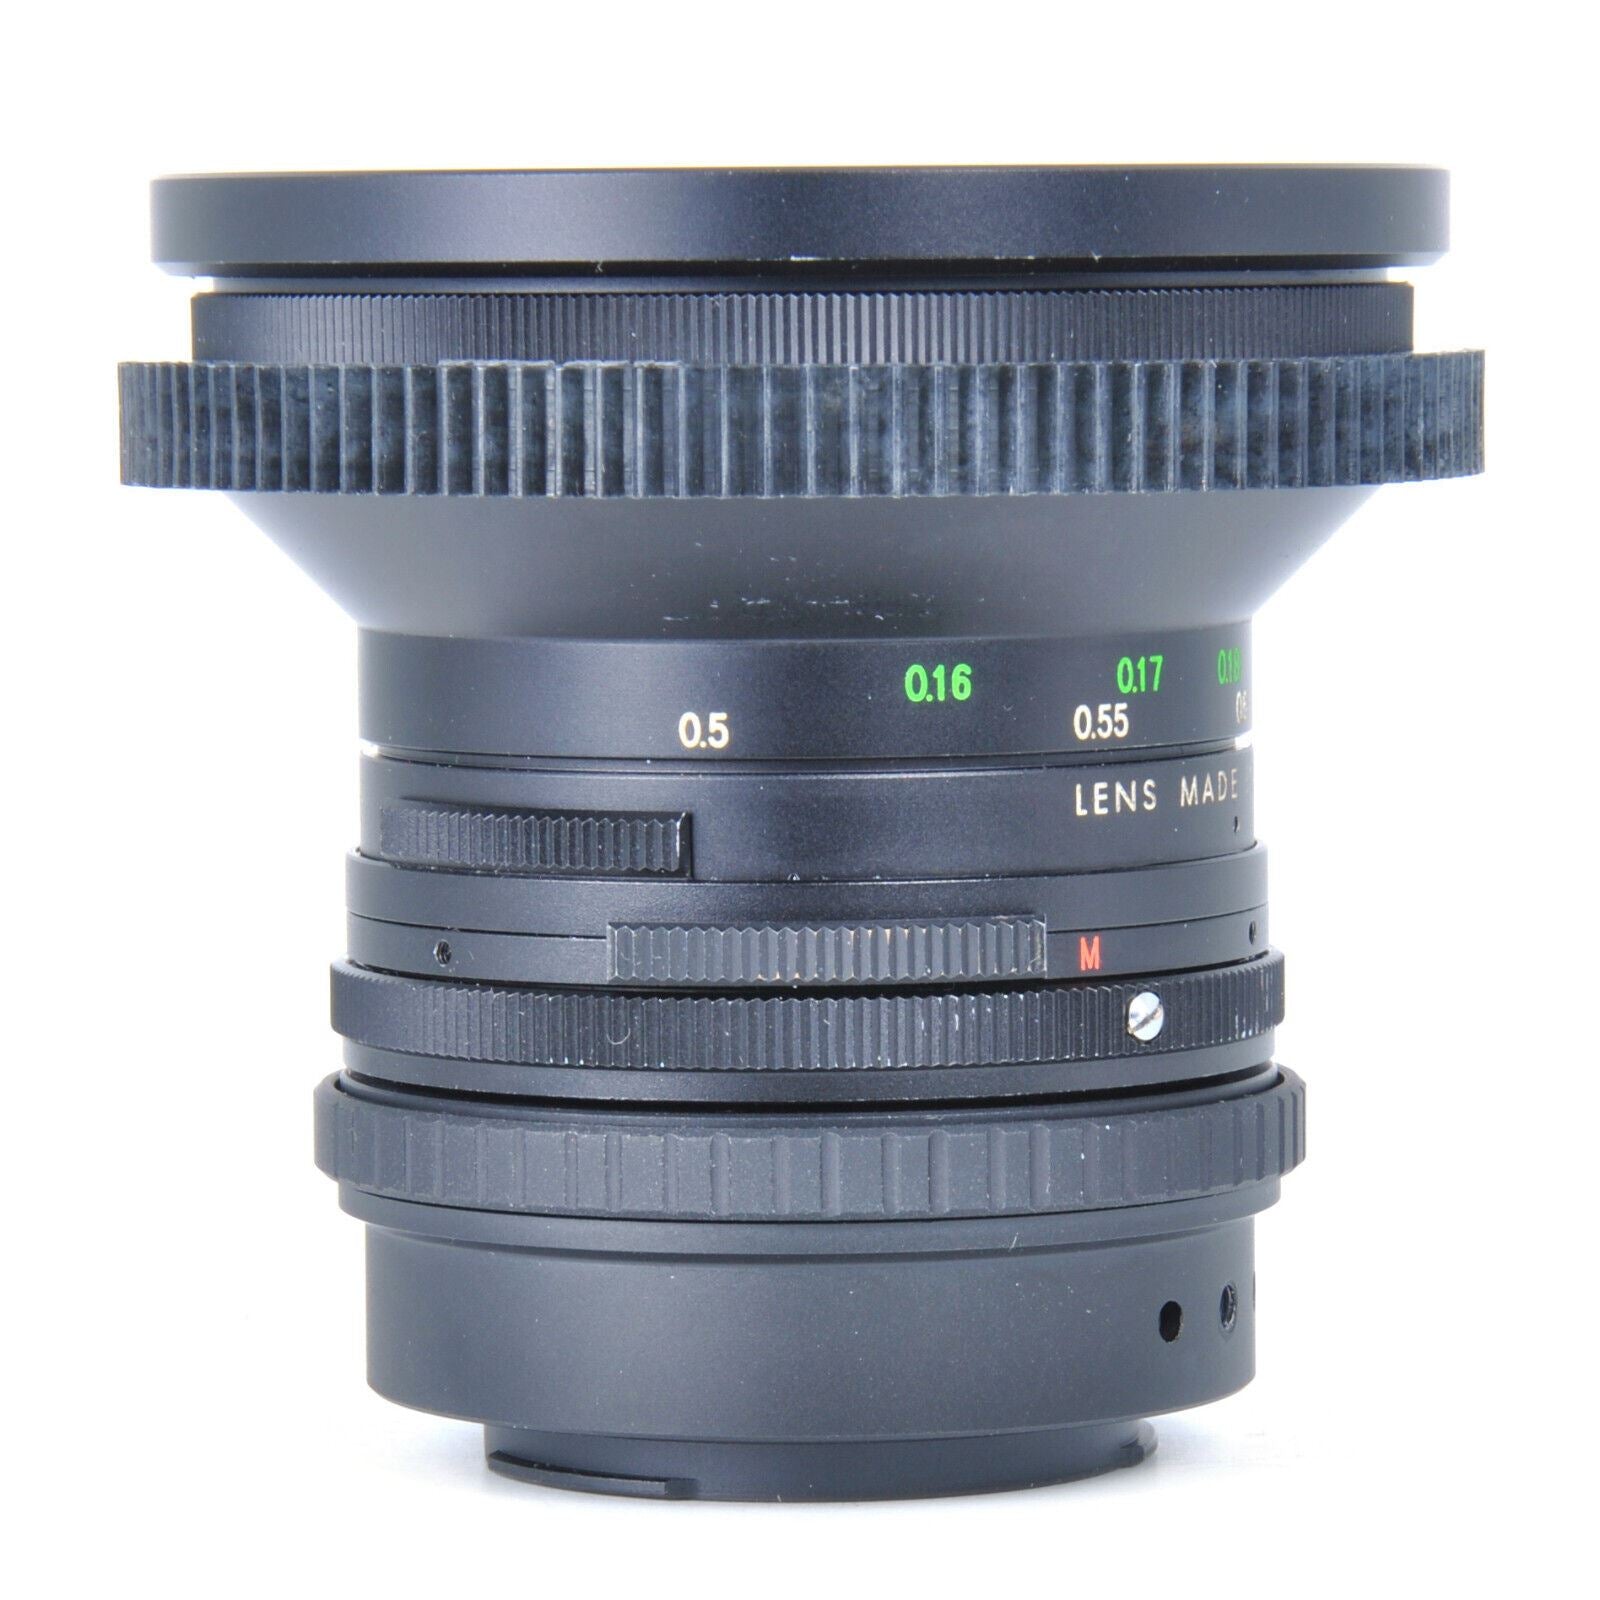 Vivitar Auto Wide-Angle 20mm F3.8 Cine Modded Lens For Sony-E Mount! - TerPhoto Store